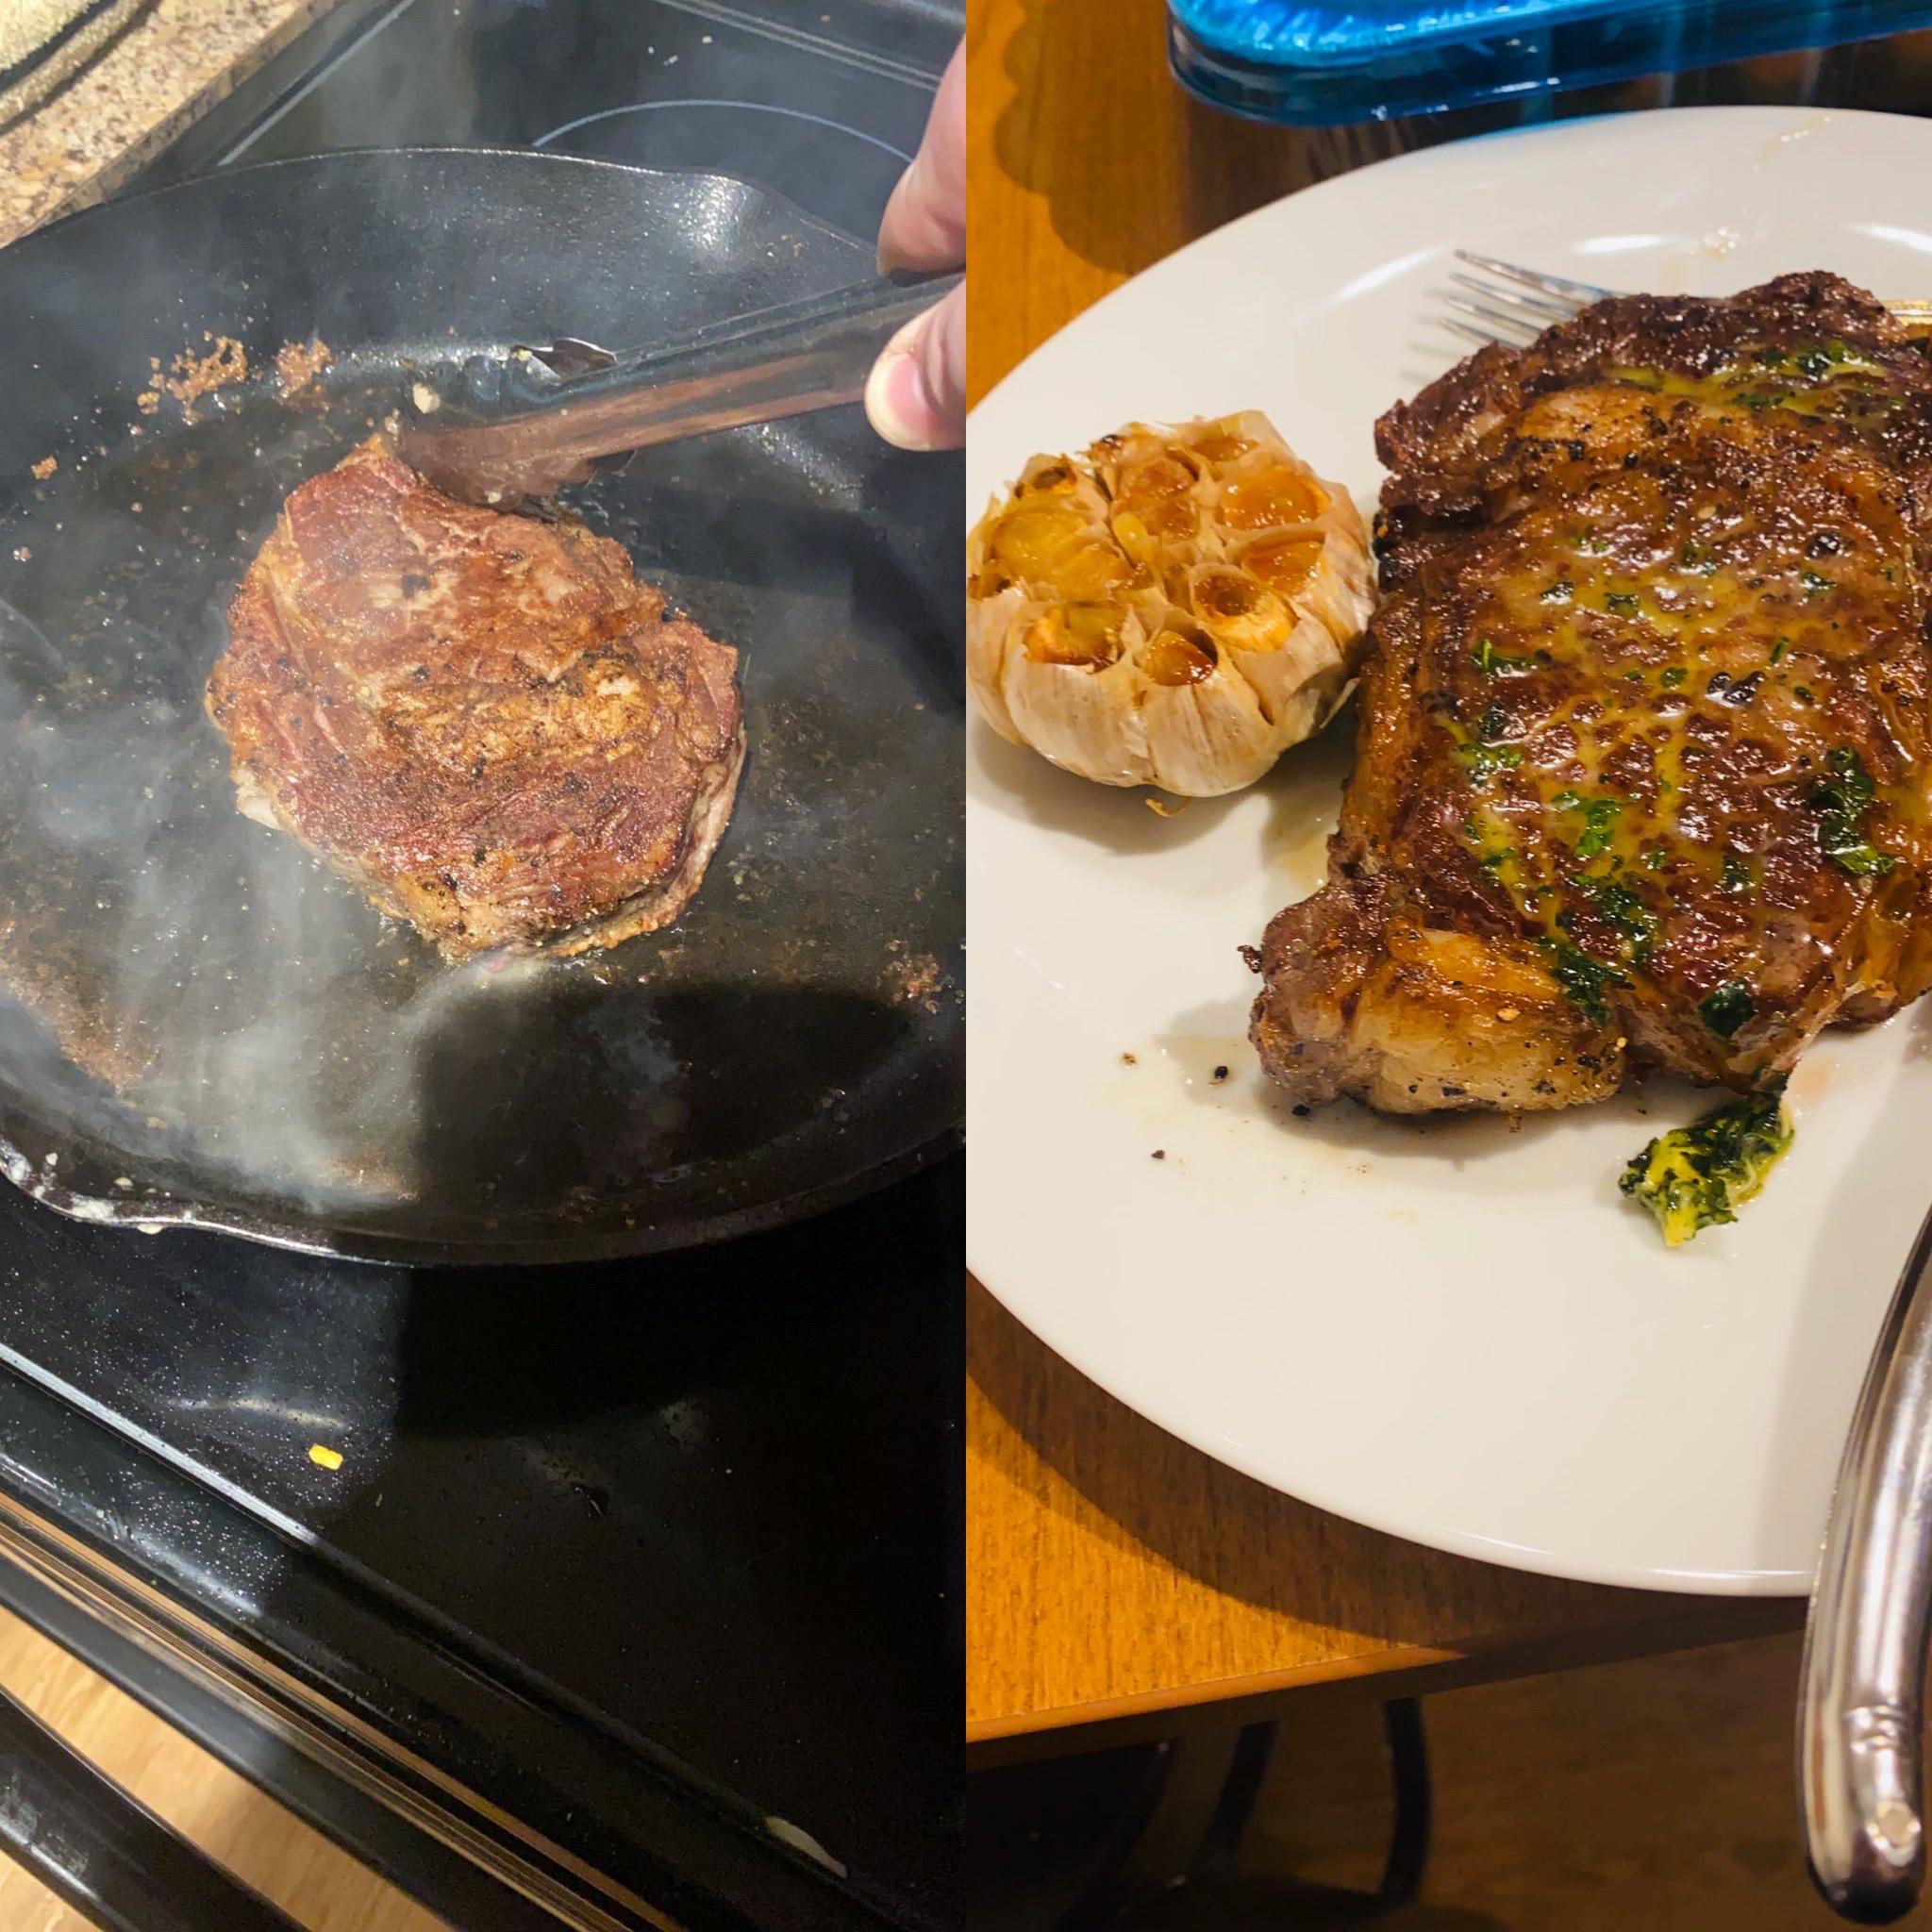 Some low quality pics of a high quality steak : steak